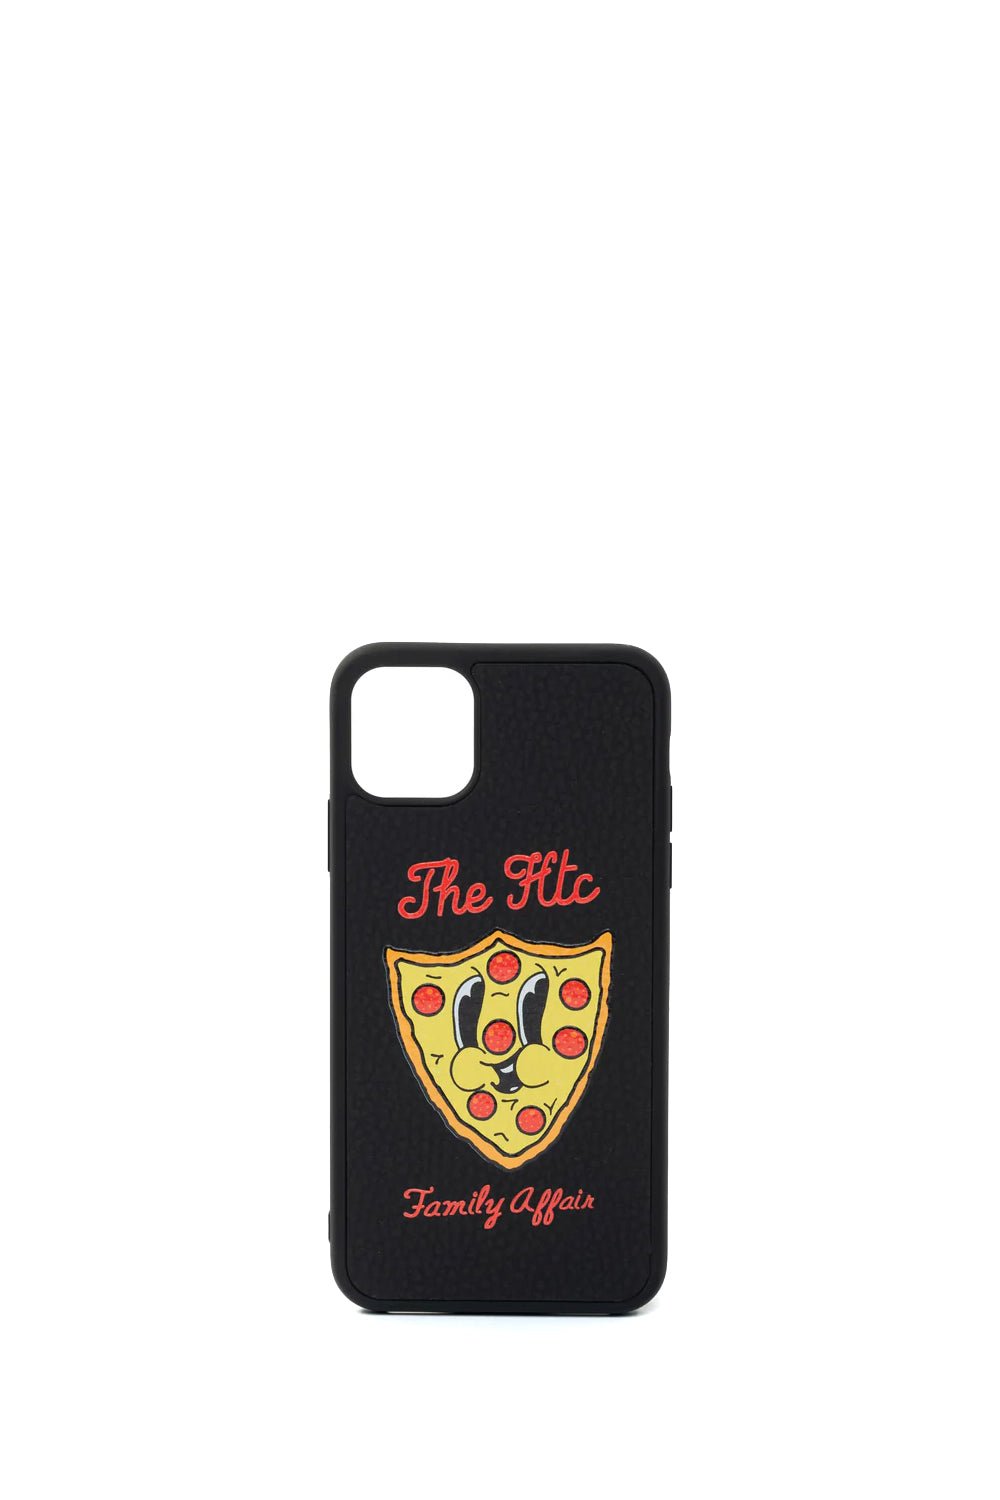 SLICETC COVER Iphone 11 Limited Edition Iphone 11 black cover with 'HTC FAMILY AFFAIR print. 100% leather. Made in Italy. HTC LOS ANGELES